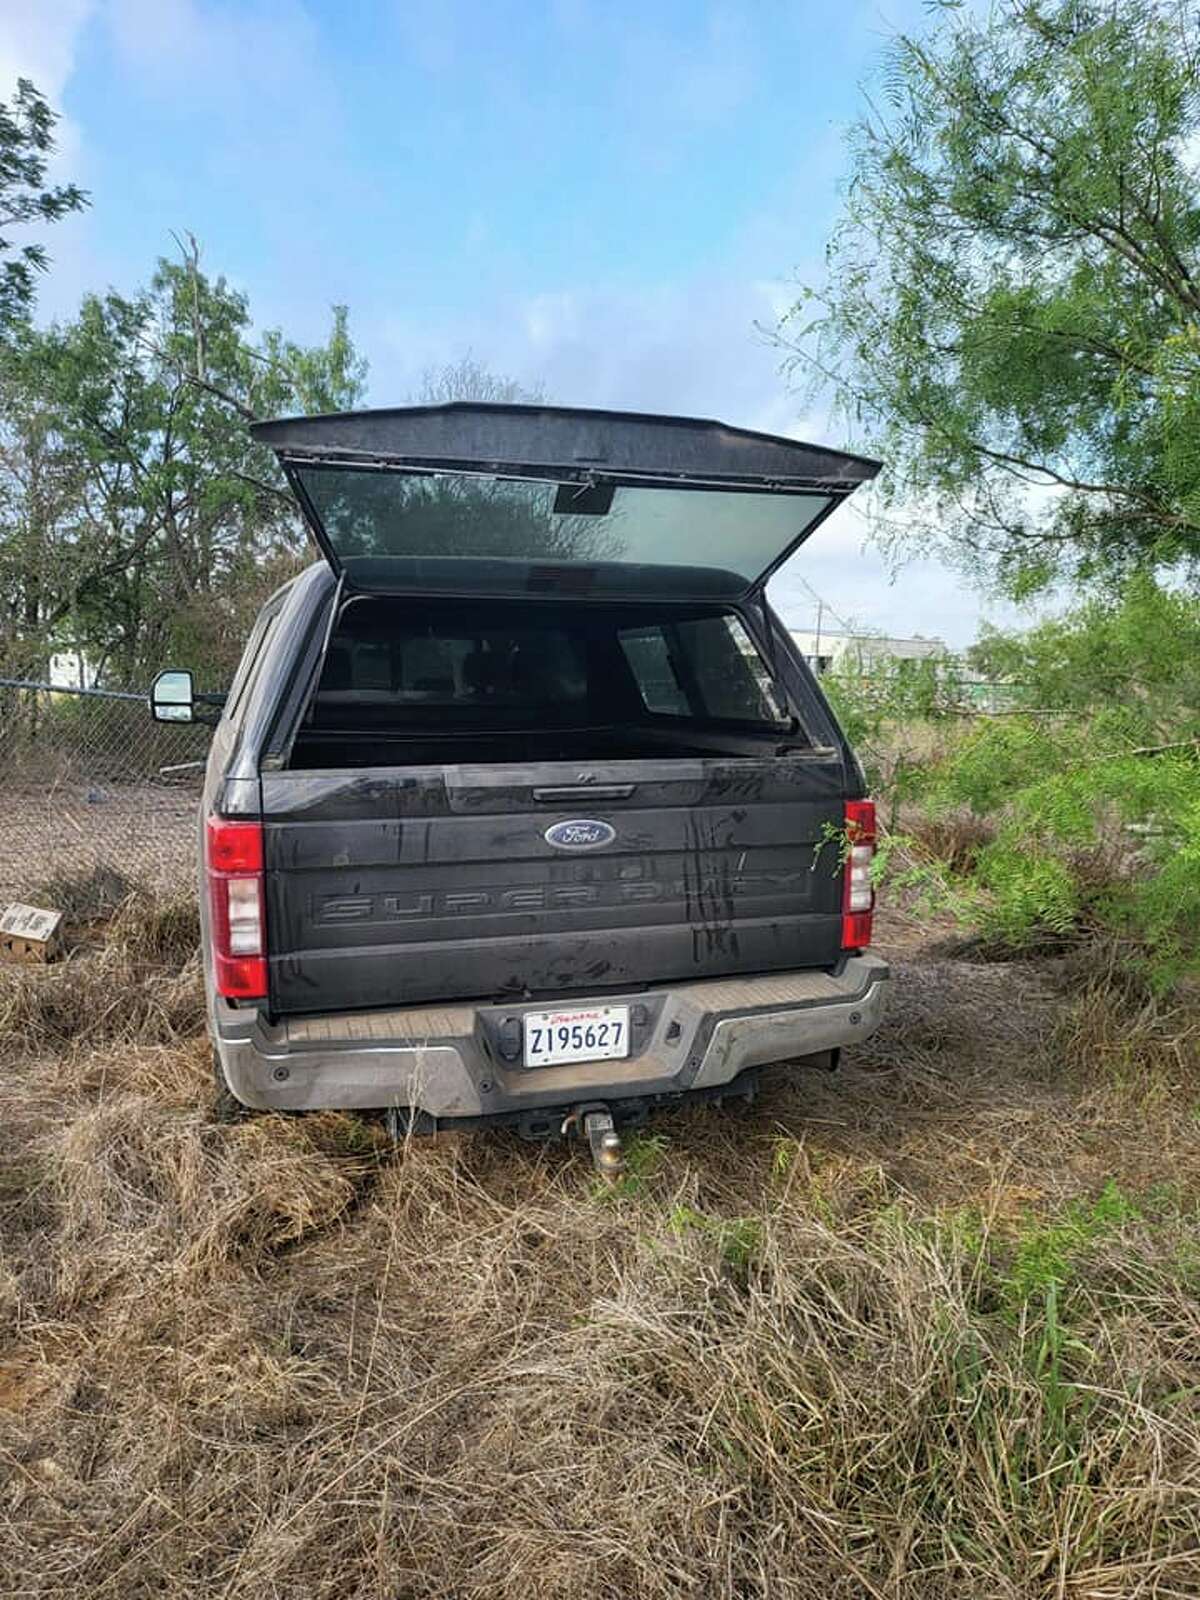 The teens eventually came to a stop in a field where one passenger then fled on foot. 